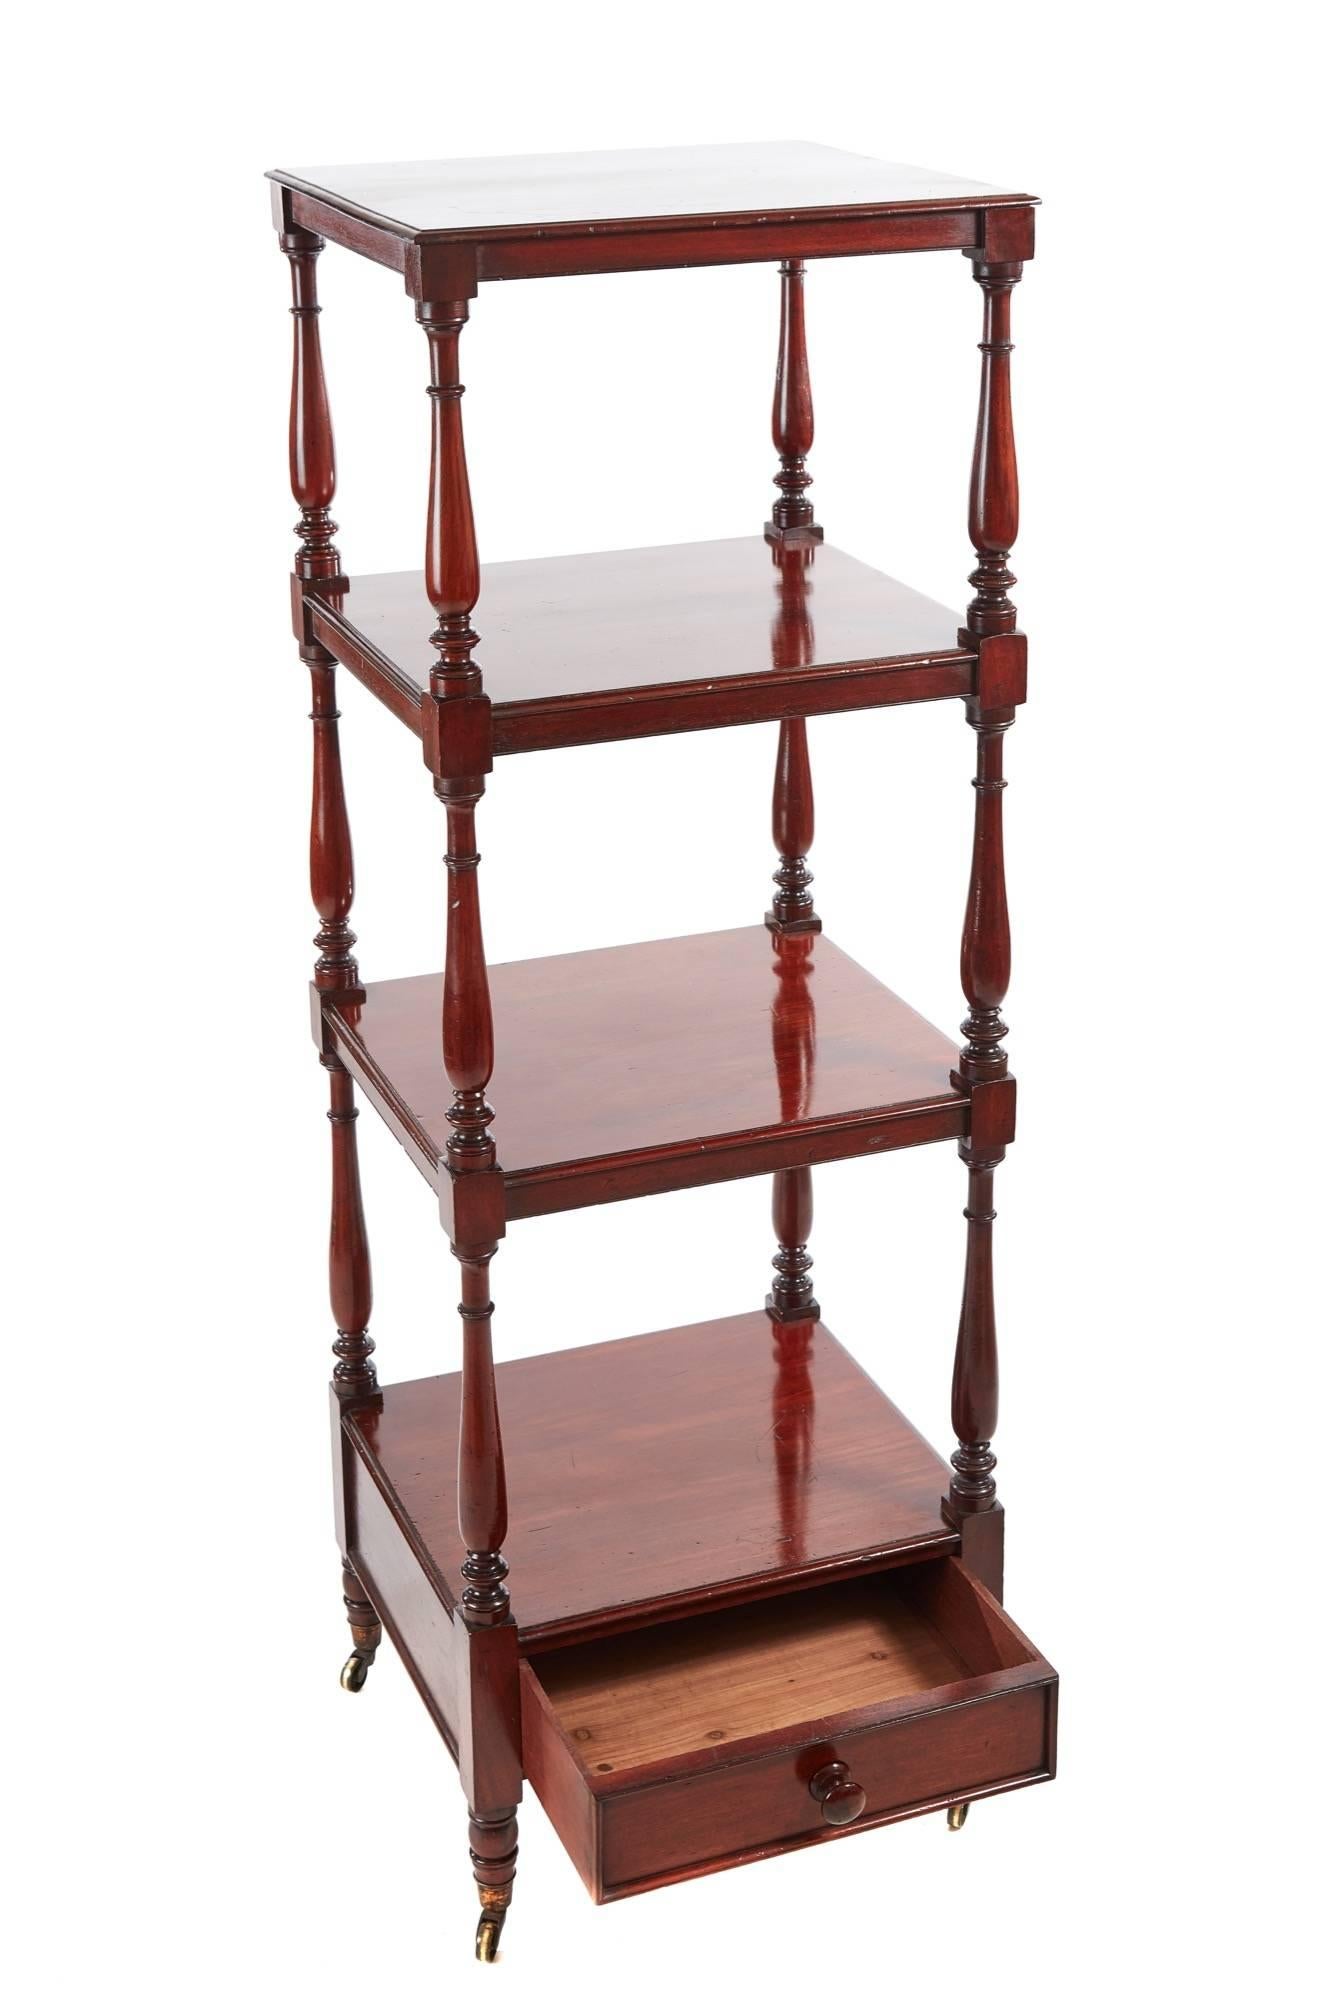 William-IV mahogany freestanding four-tier whatnot, the tiers have turned mahogany supports and finials to the top tier, single drawer to the base with original turned mahogany knob, raised on turned legs with original castors
Fantastic color and